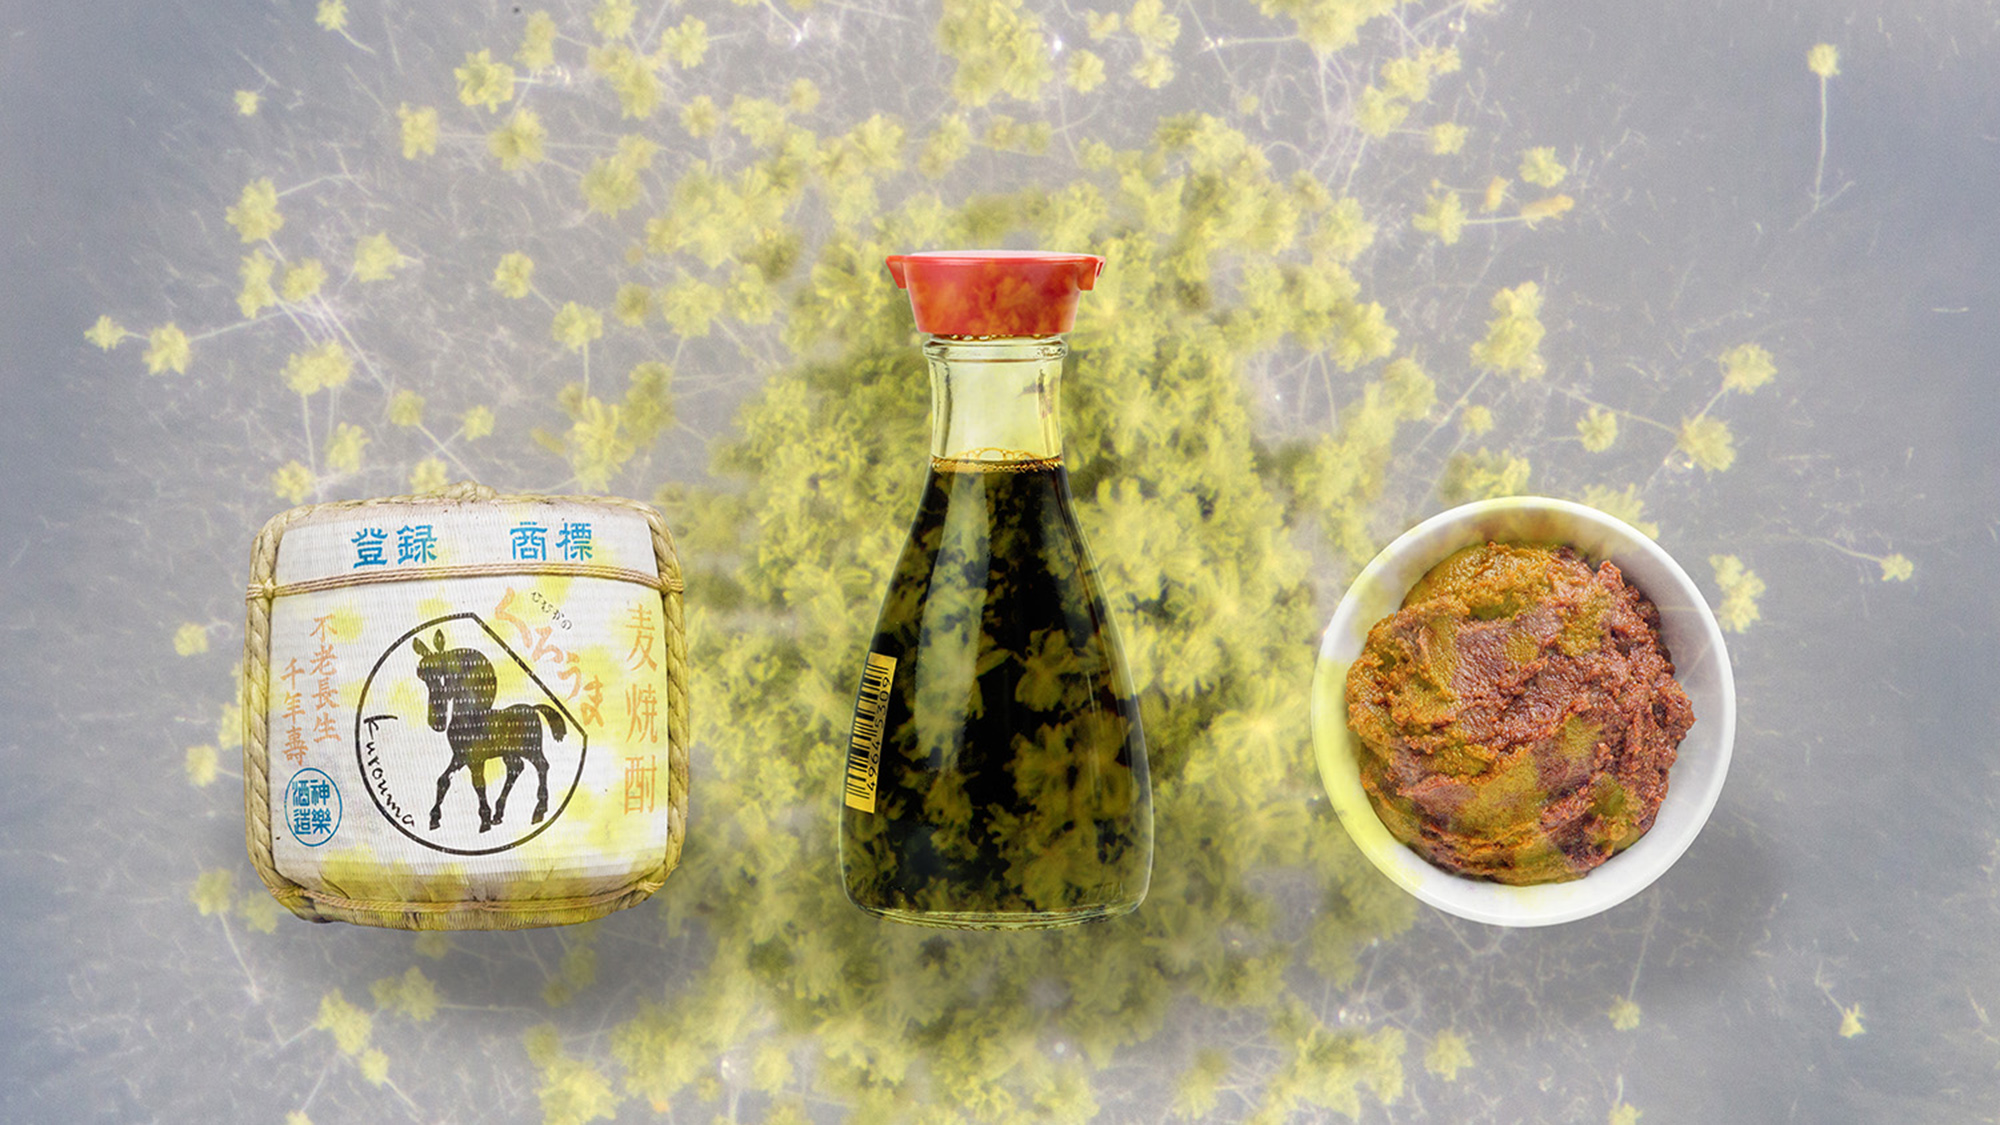 The mold Aspergillus oryzae helps to make several fermented foods, including sake, soy sauce, and miso.